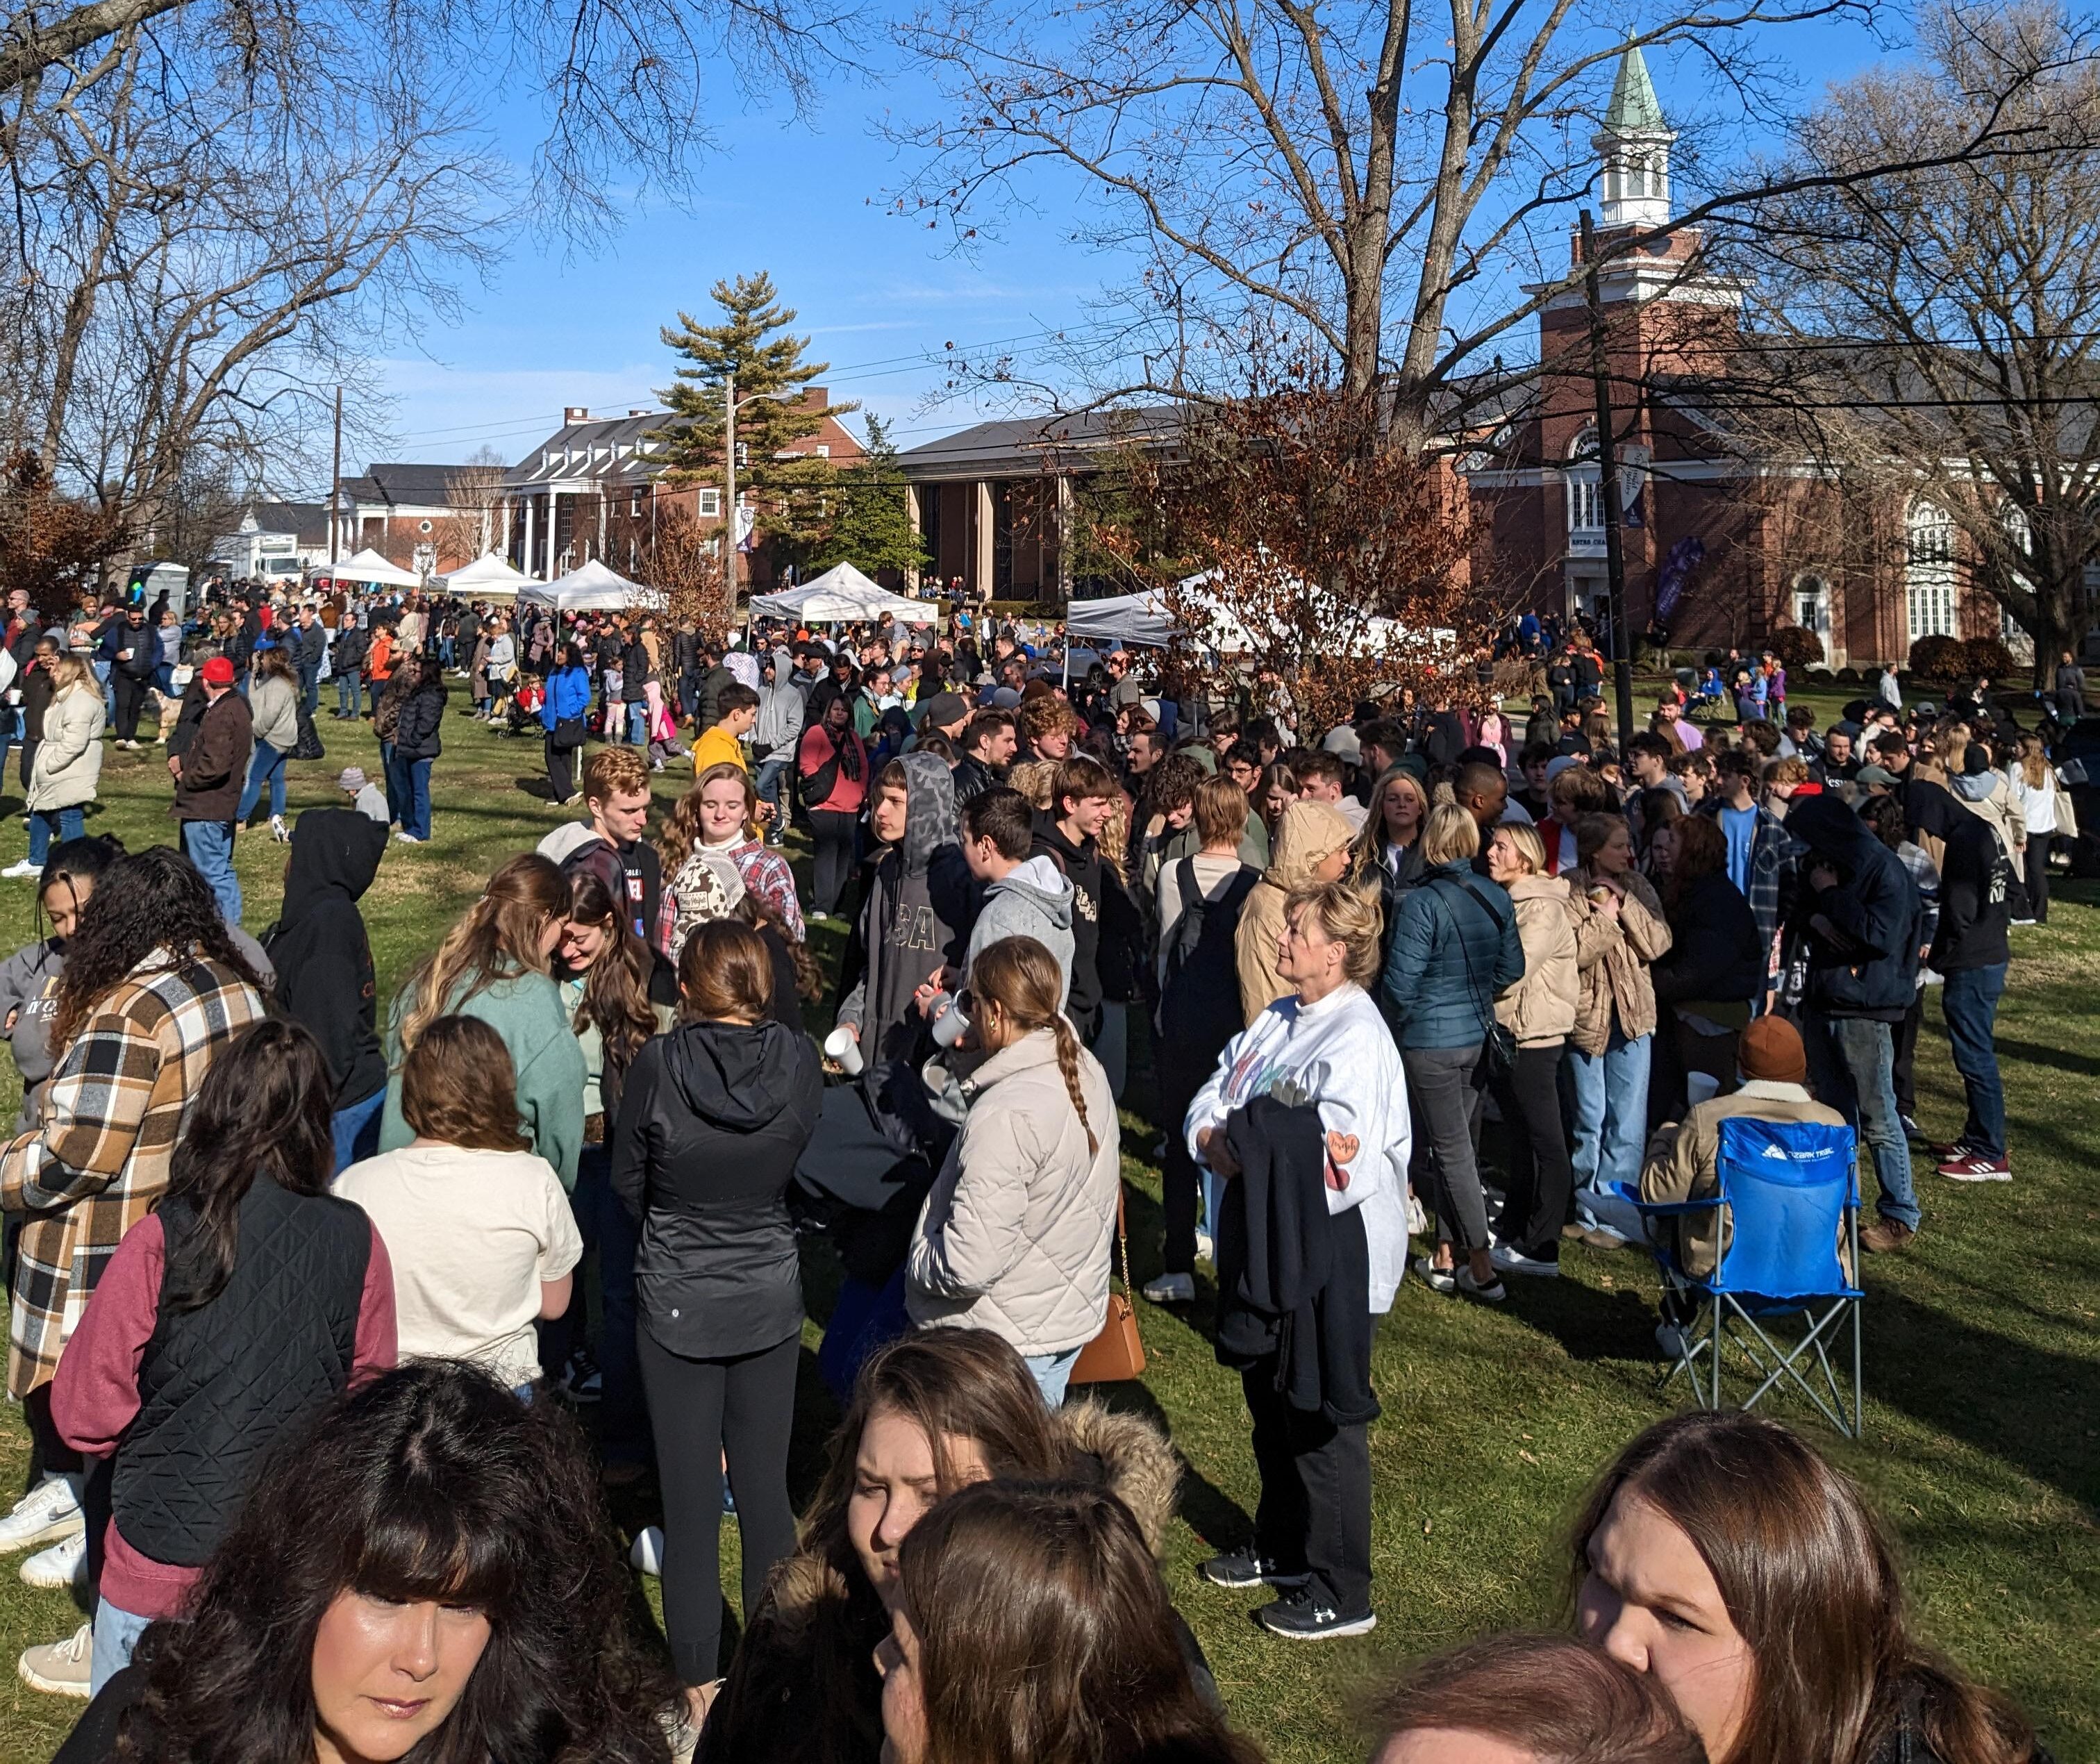 Small College Revival Turns into Chaos as Thousands Overrun Kentucky Town